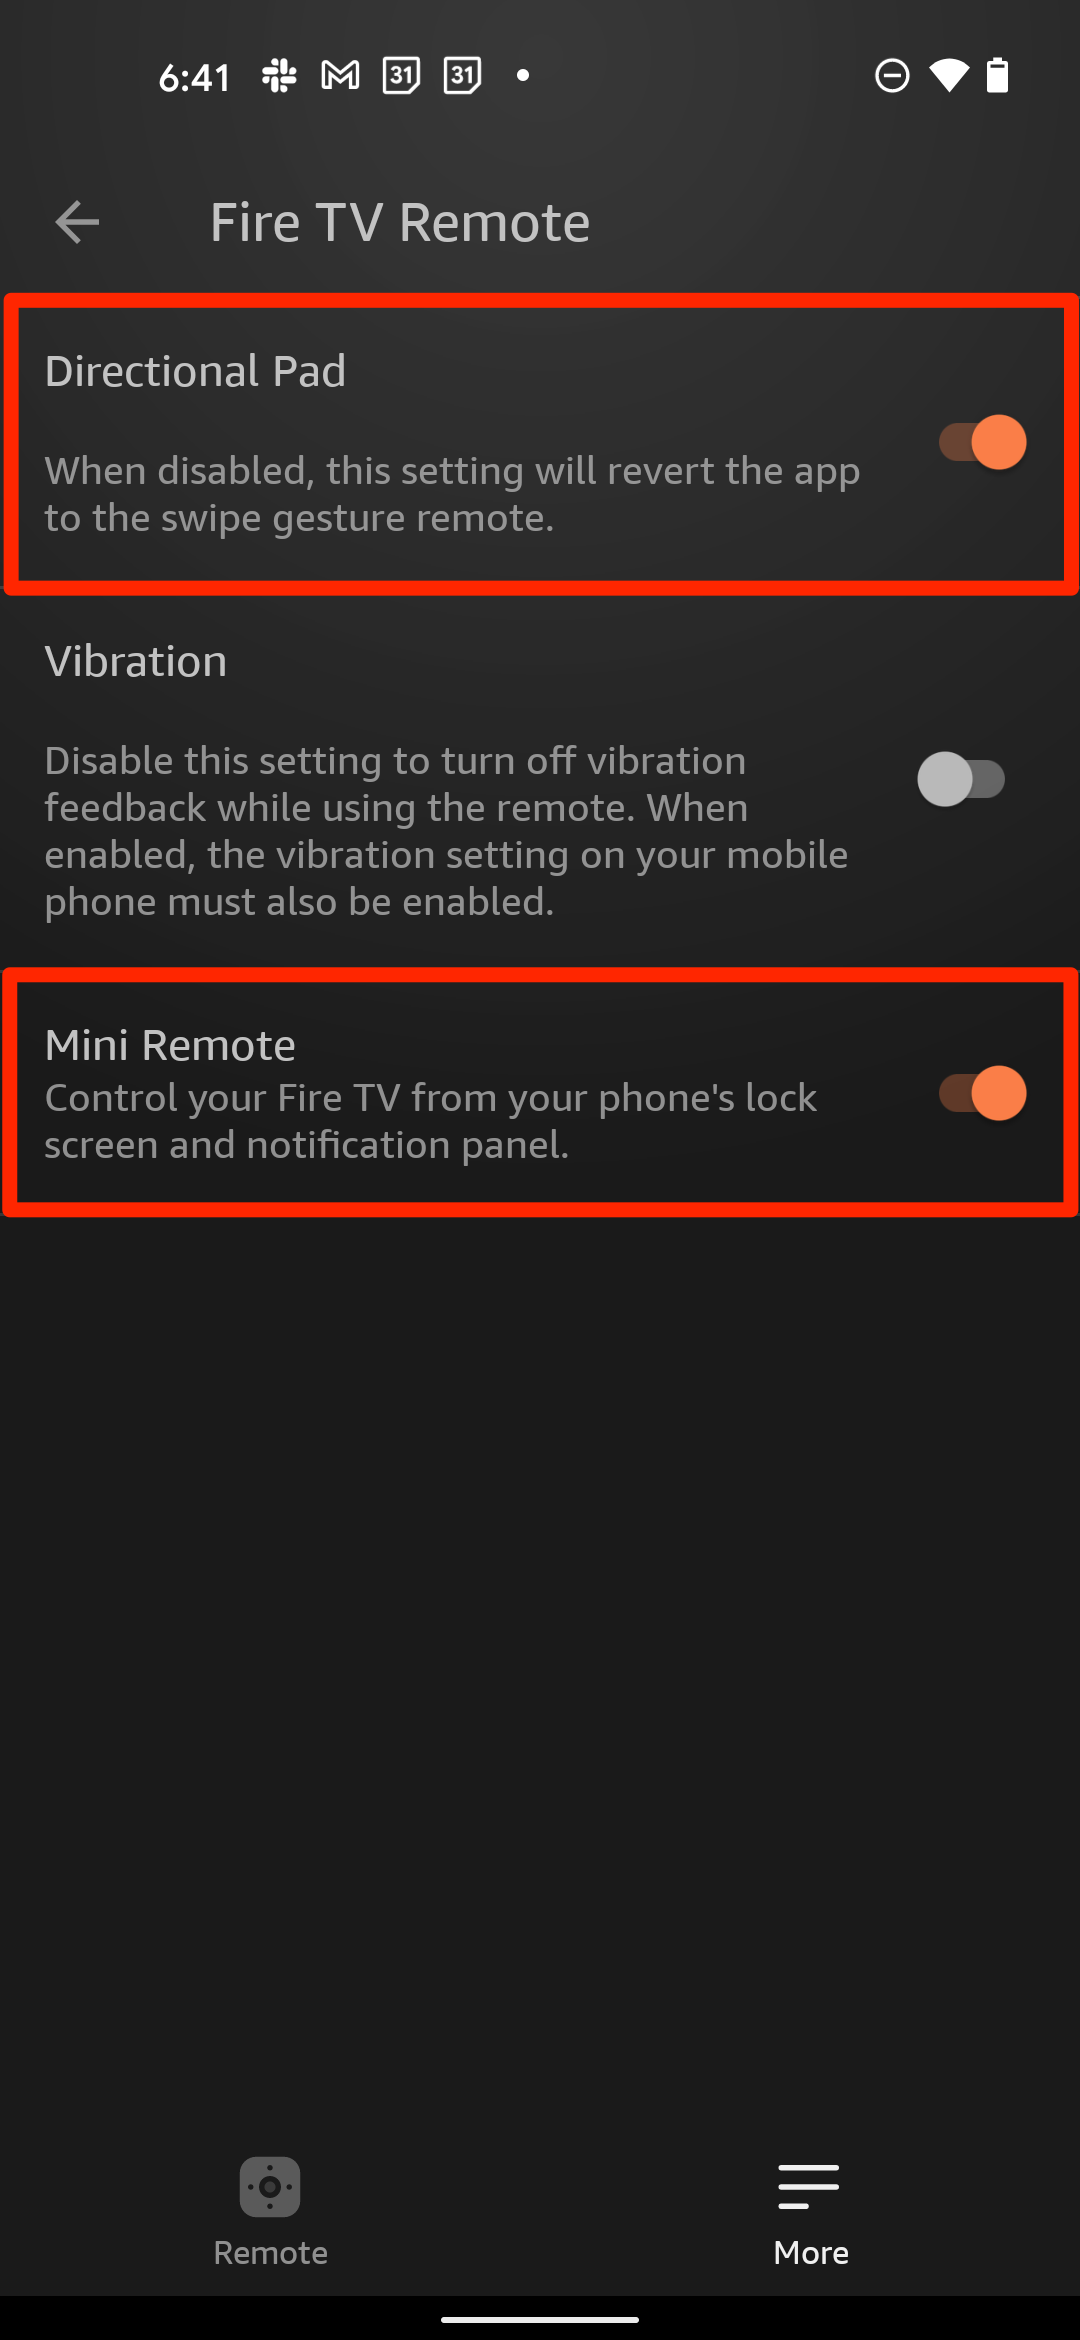 The "Fire TV Remote" settings screen in the Fire TV app. The "Directional Pad" and "Mini Remote" options are highlighted.